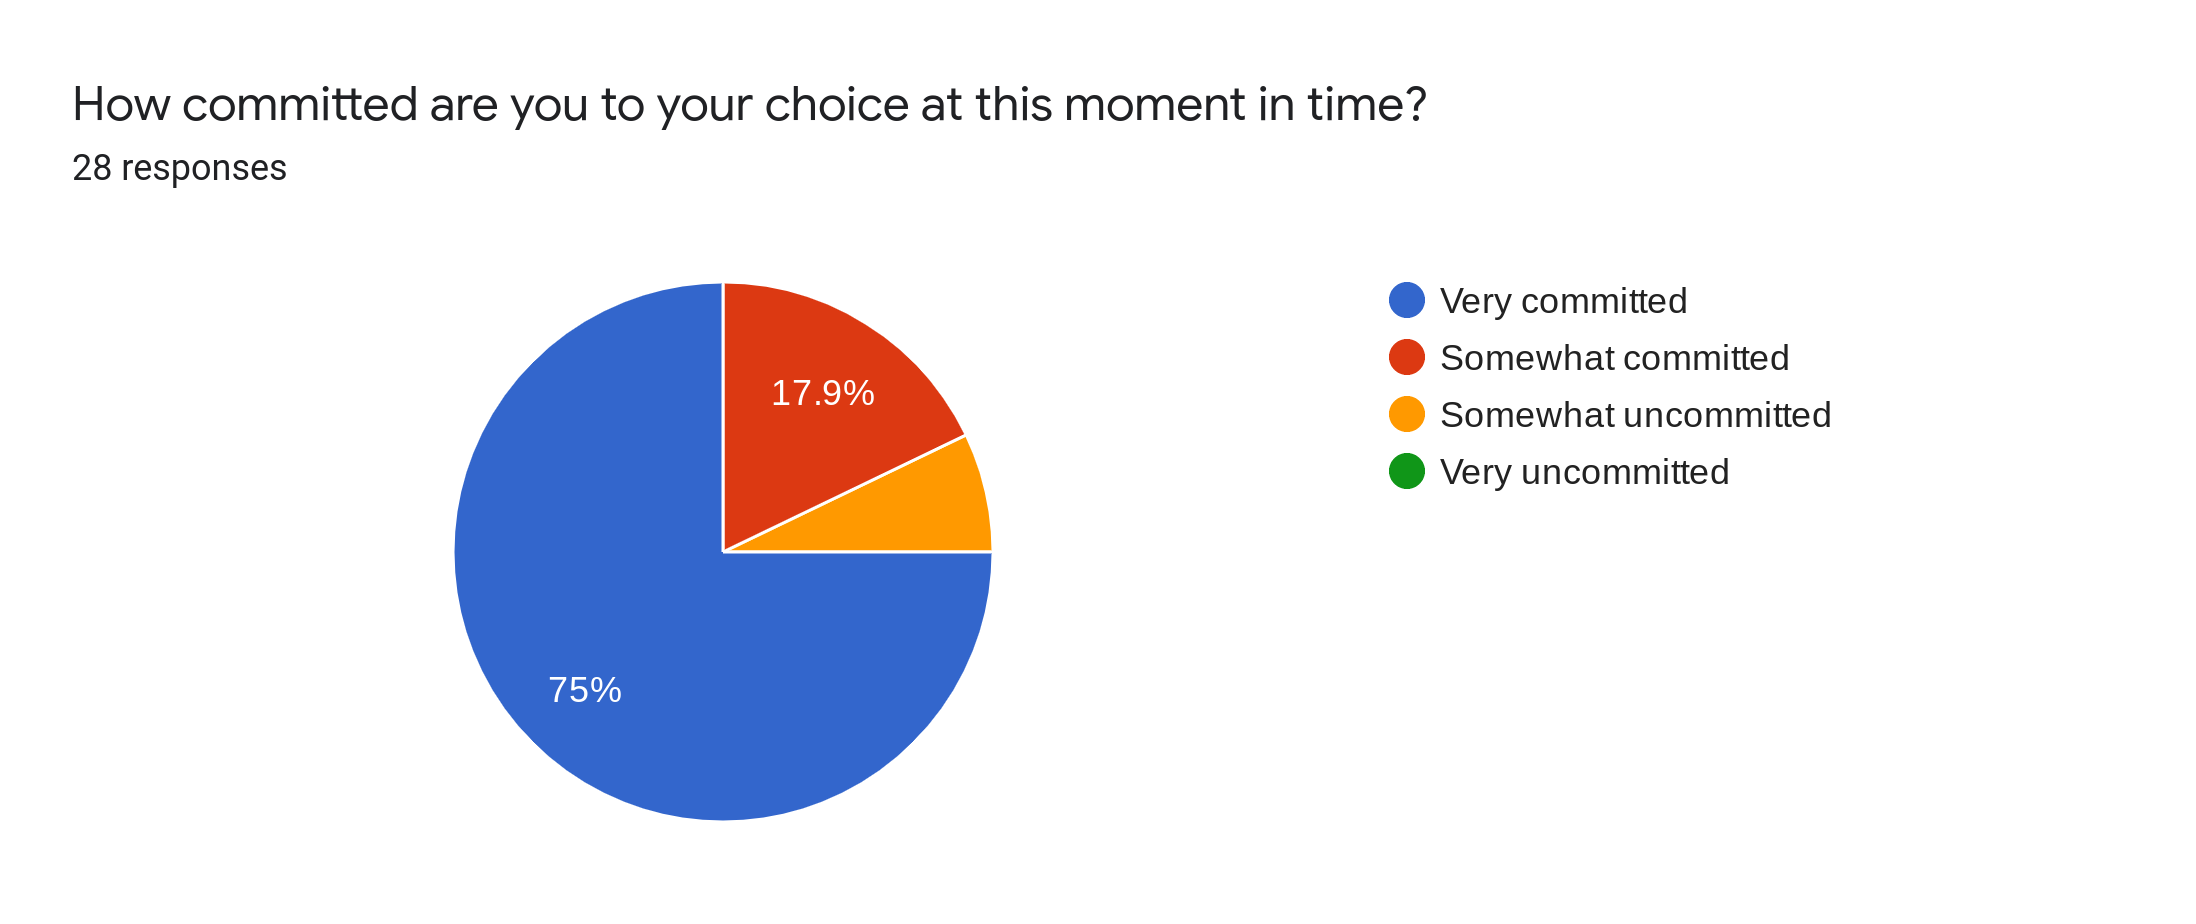 Forms response chart. Question title: How committed are you to your choice at this moment in time?. Number of responses: 28 responses.